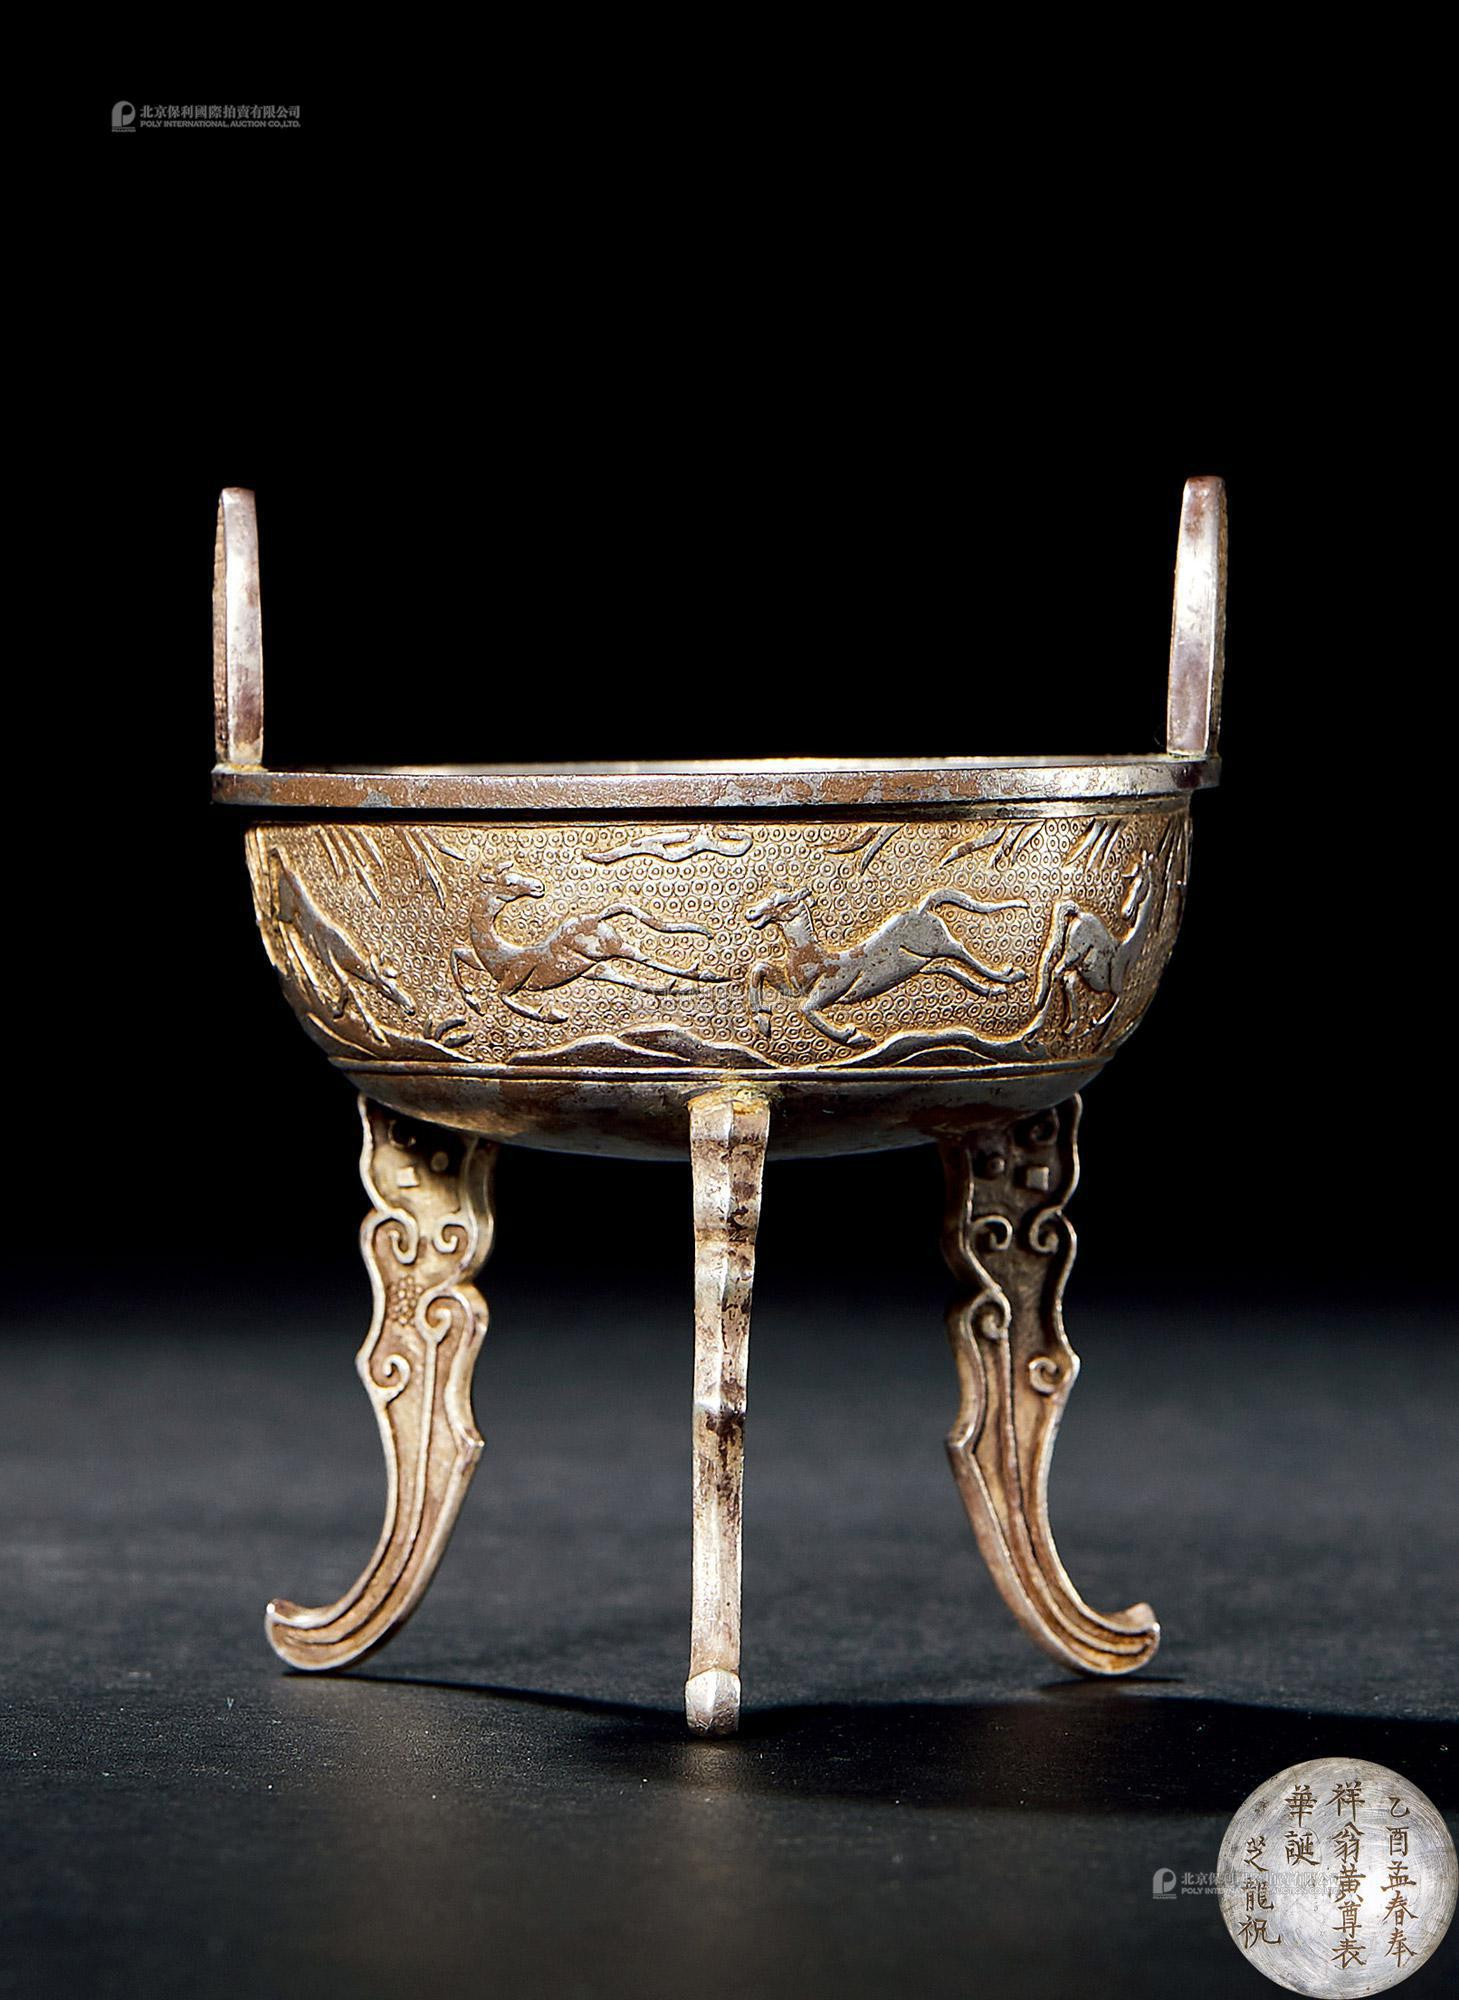 A SILVER TRIPOD CENSER WITH‘HORSES’ PATTERN FOR THE SIXTIETH BIRTHDAY OF HUANG DAOZHOU BY ZHENG ZHILONG